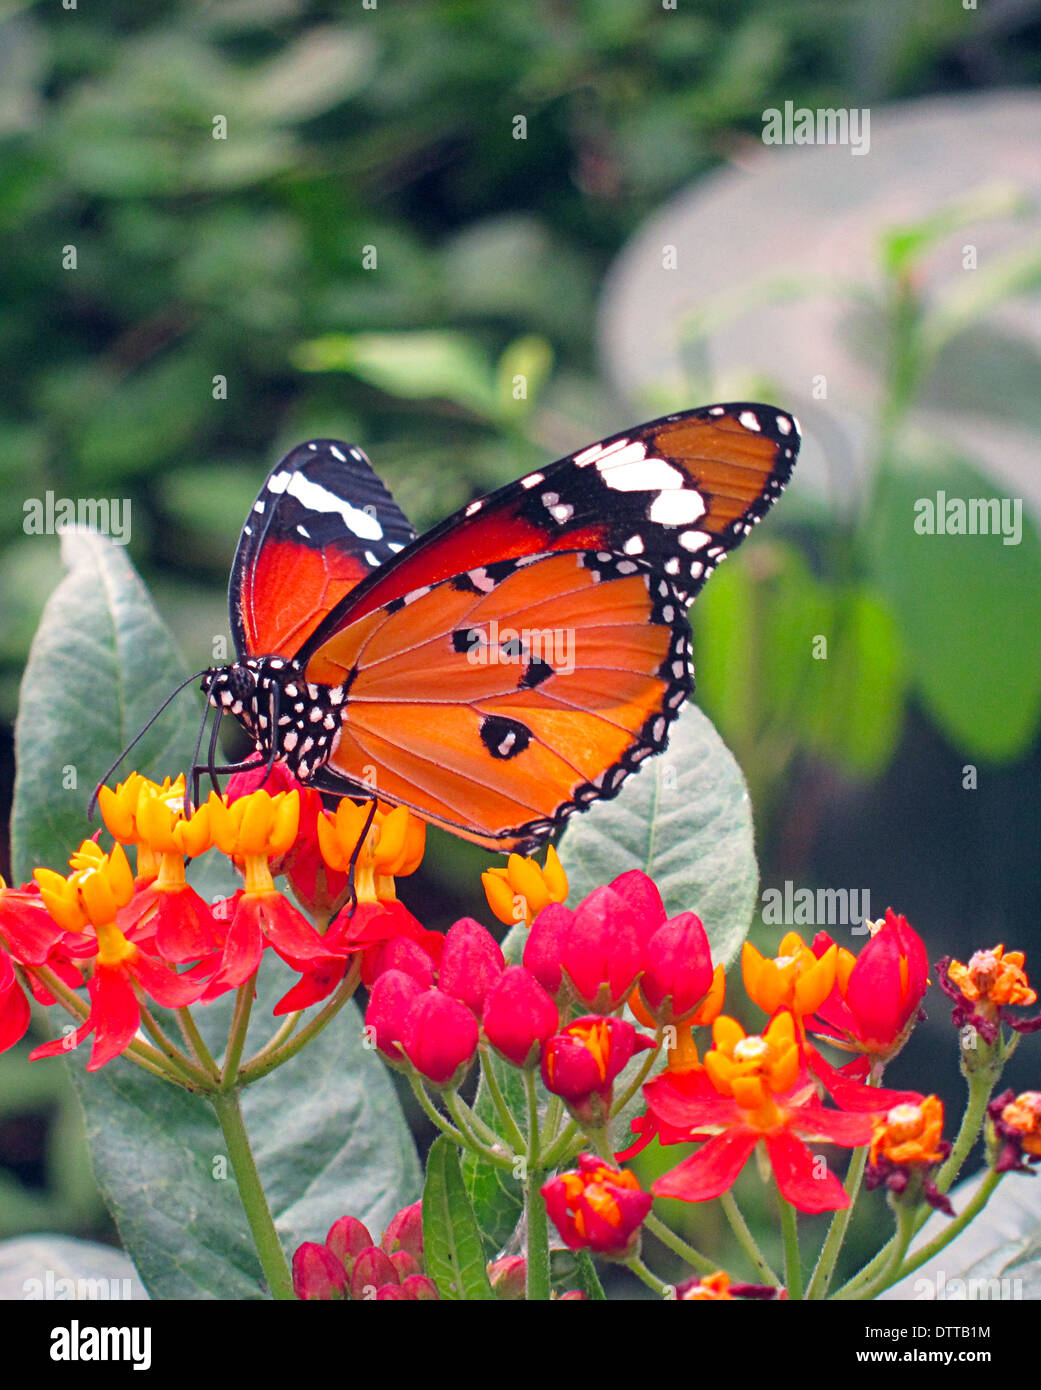 Monarch Butterfly perched on flowers Stock Photo